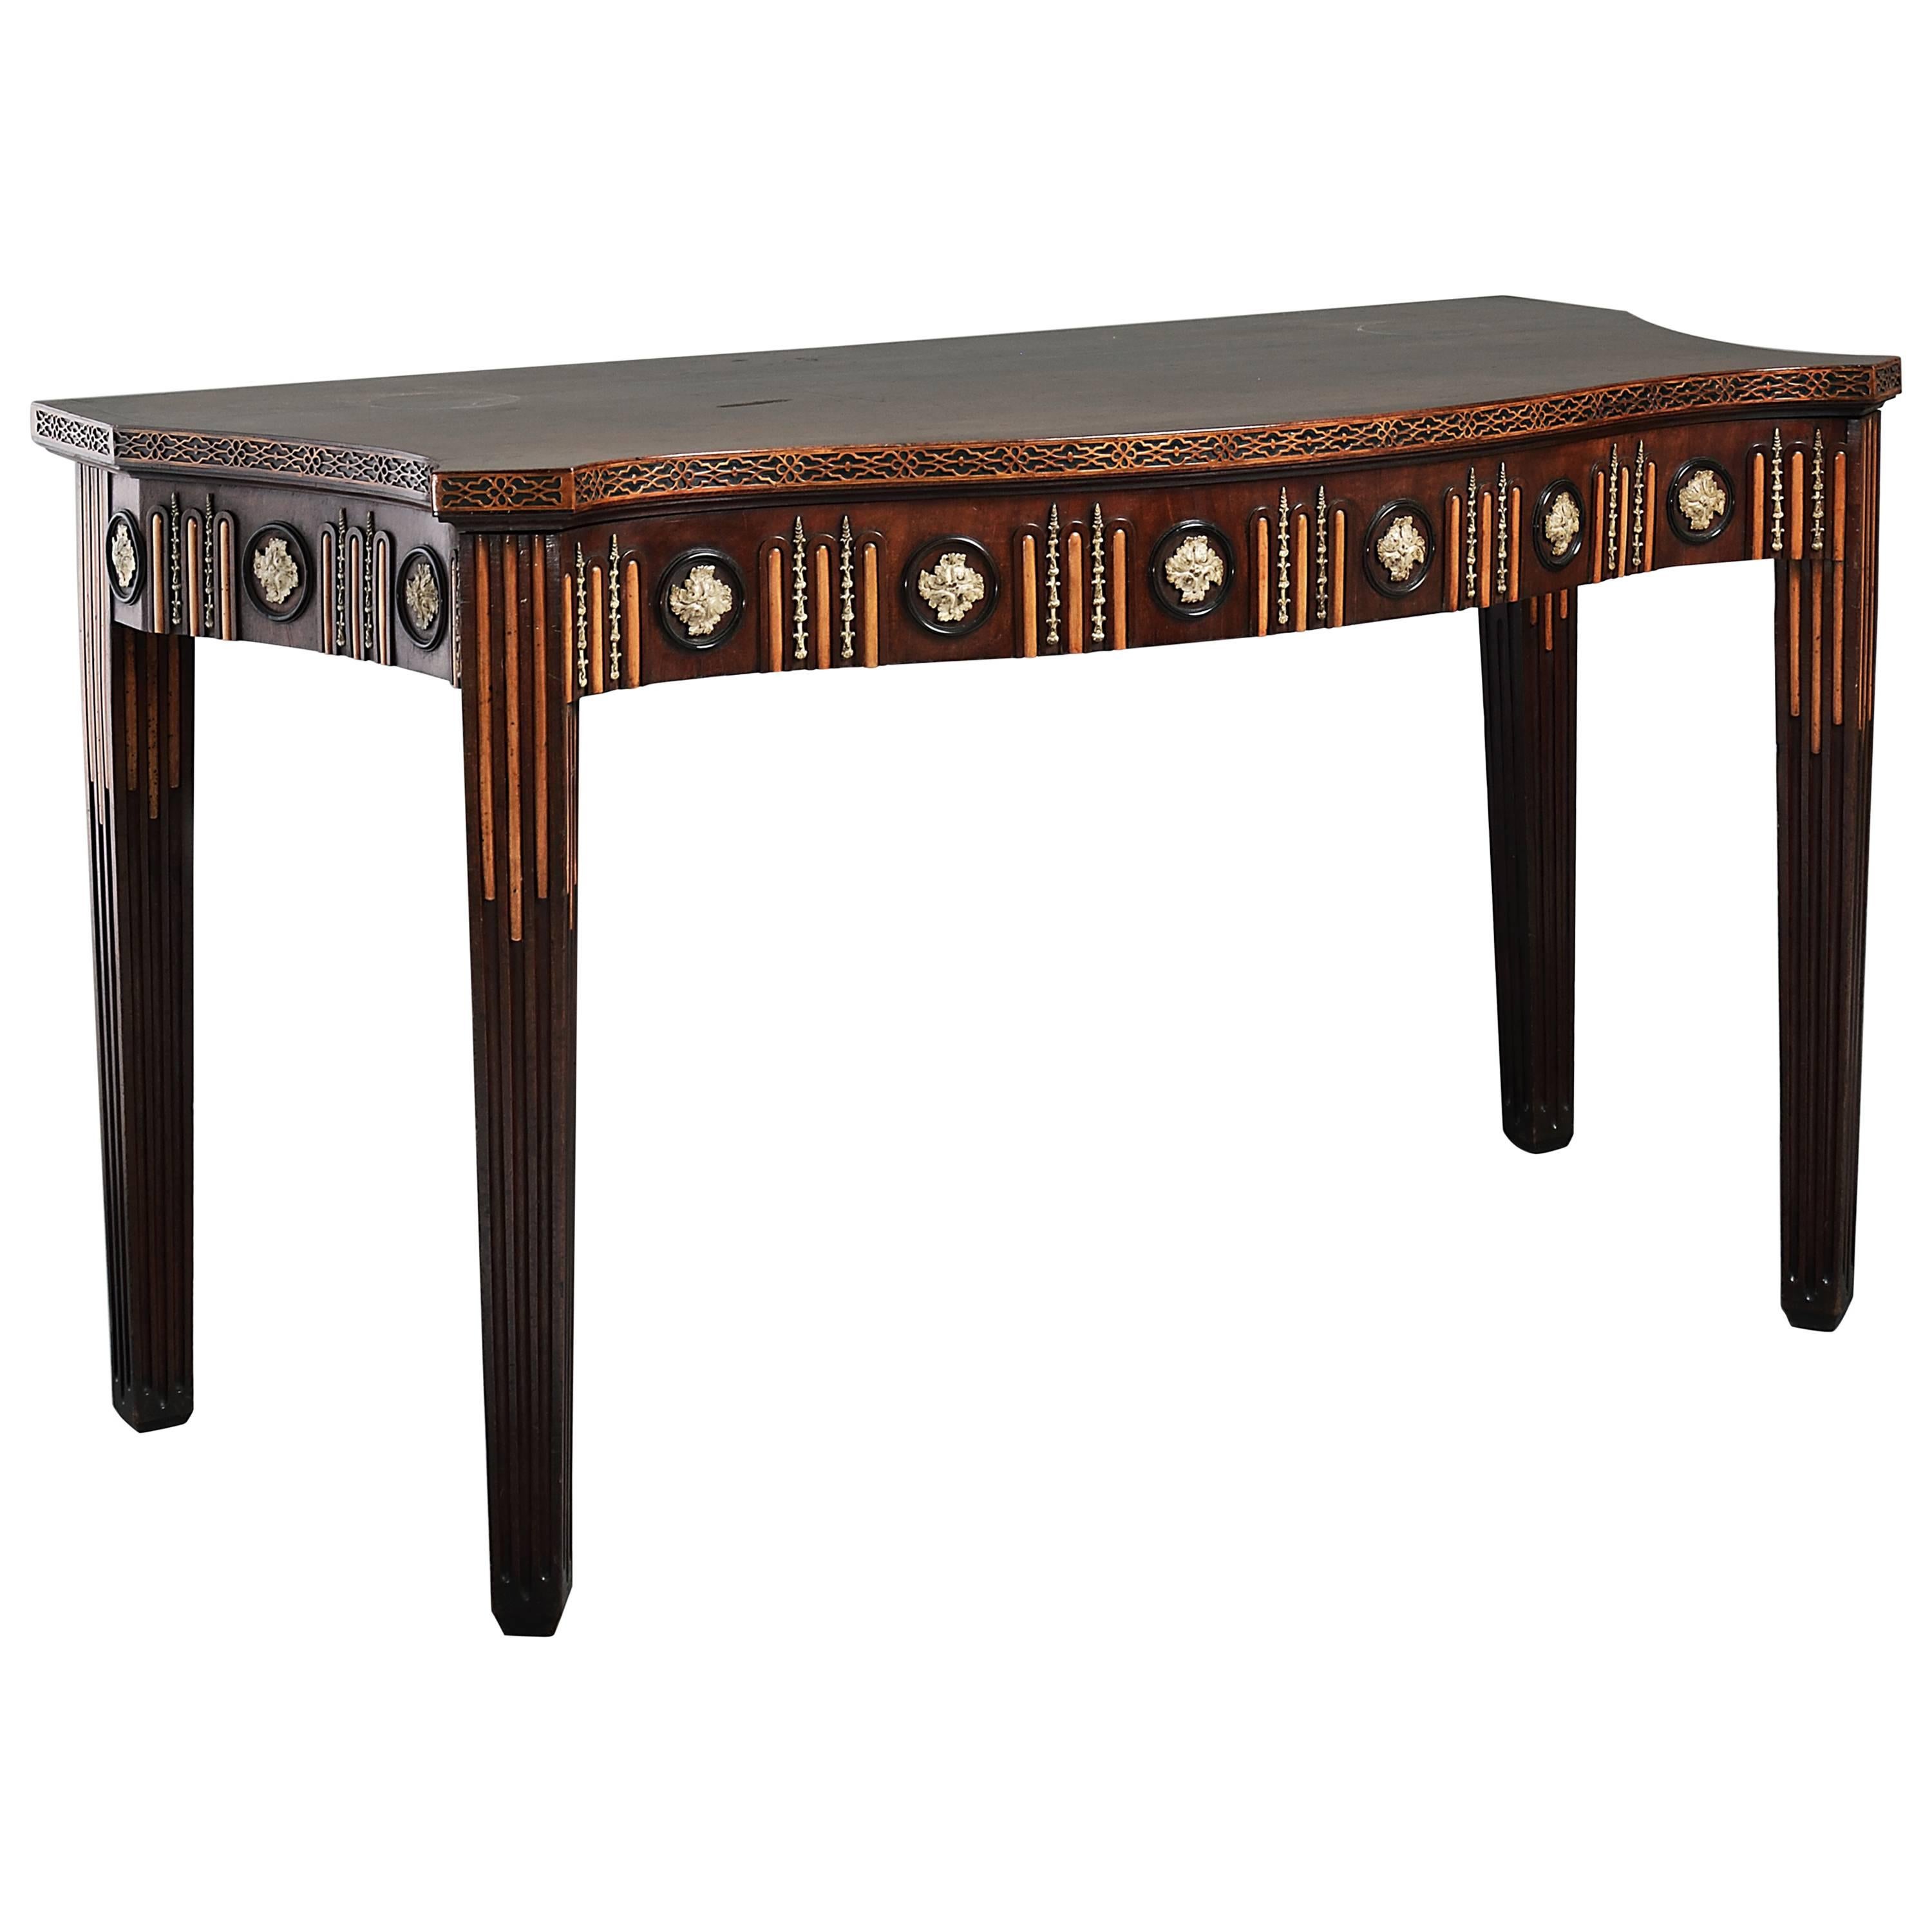 George III Mahogany Side Table in the manner of Sir William Chambers